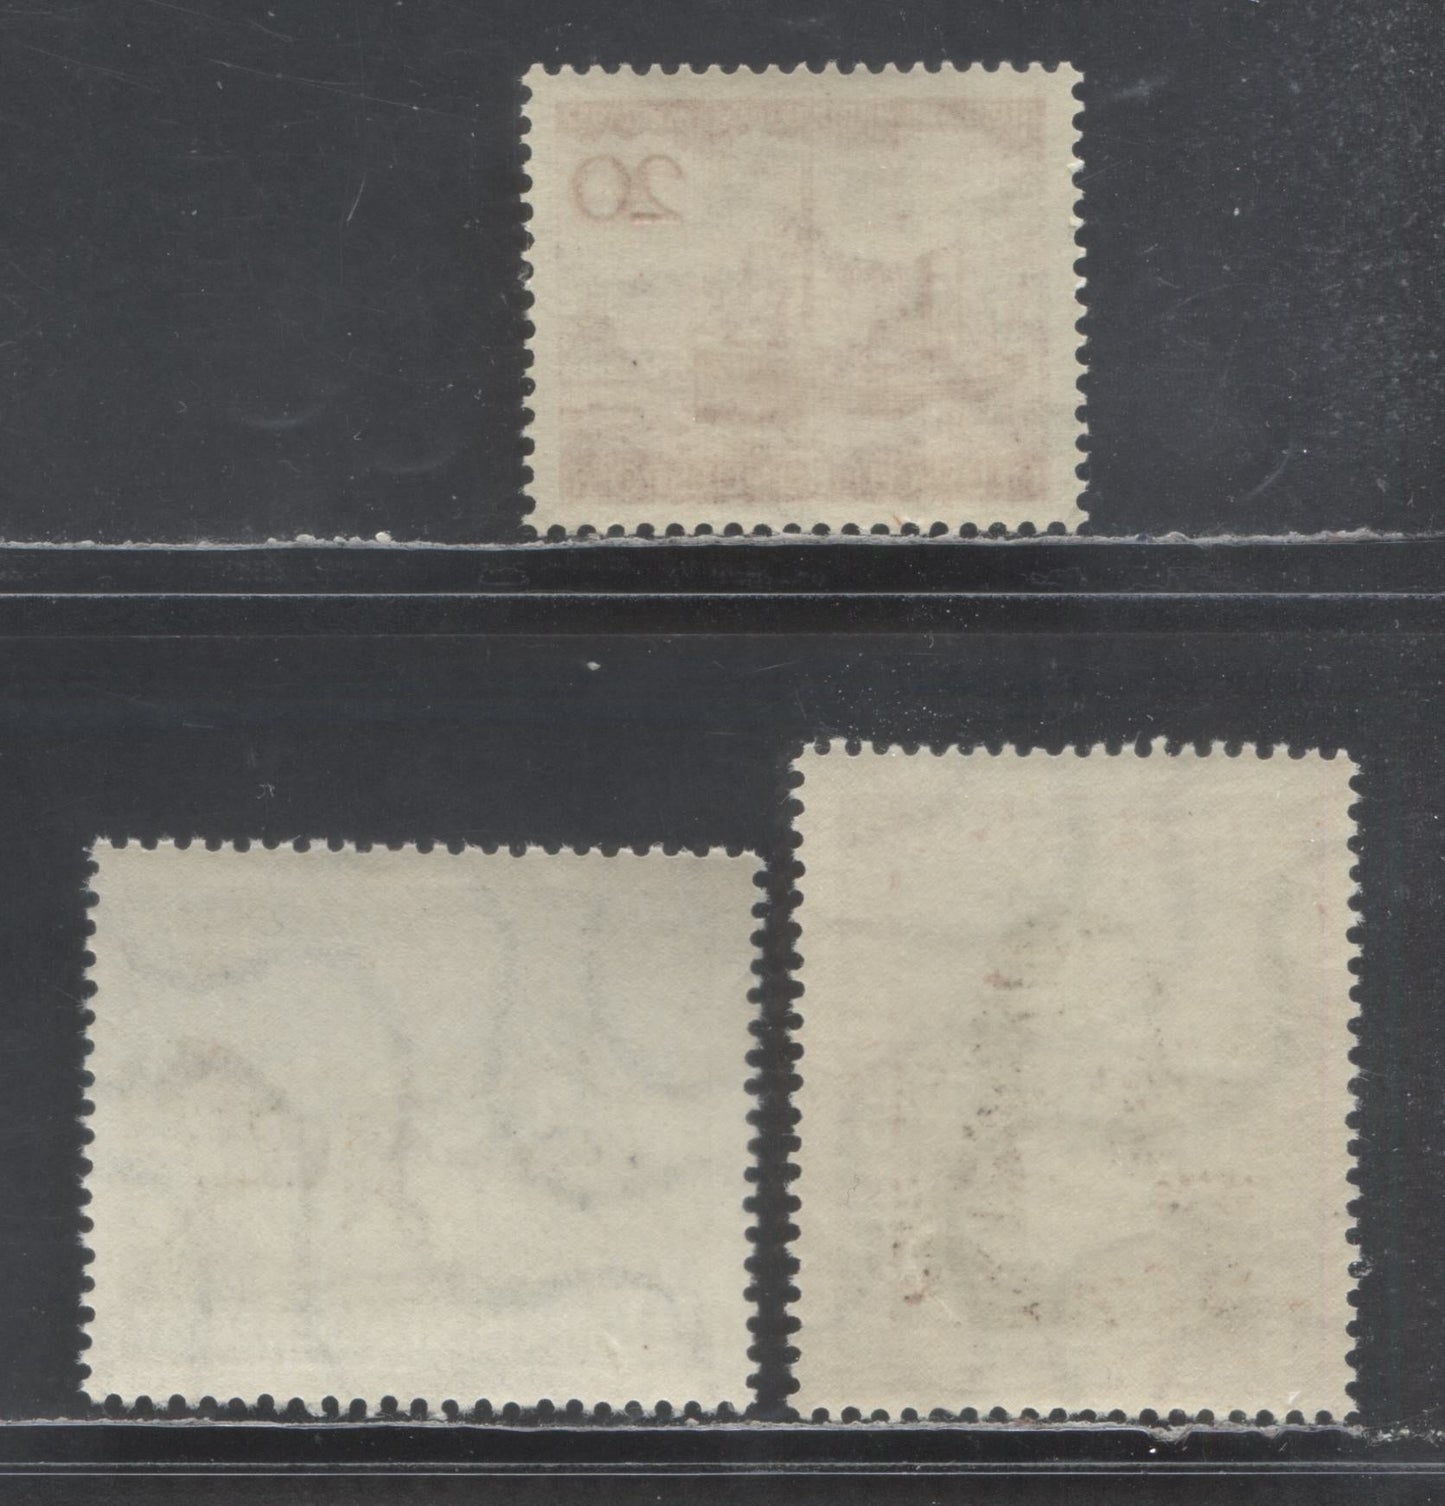 Lot 20 Germany SC#687/692 1952 Leonardo Da Vinci - Thrun & Taxis Stamp Centenary, 3 F/VFNH Singles, Click on Listing to See ALL Pictures, Estimated Value $18